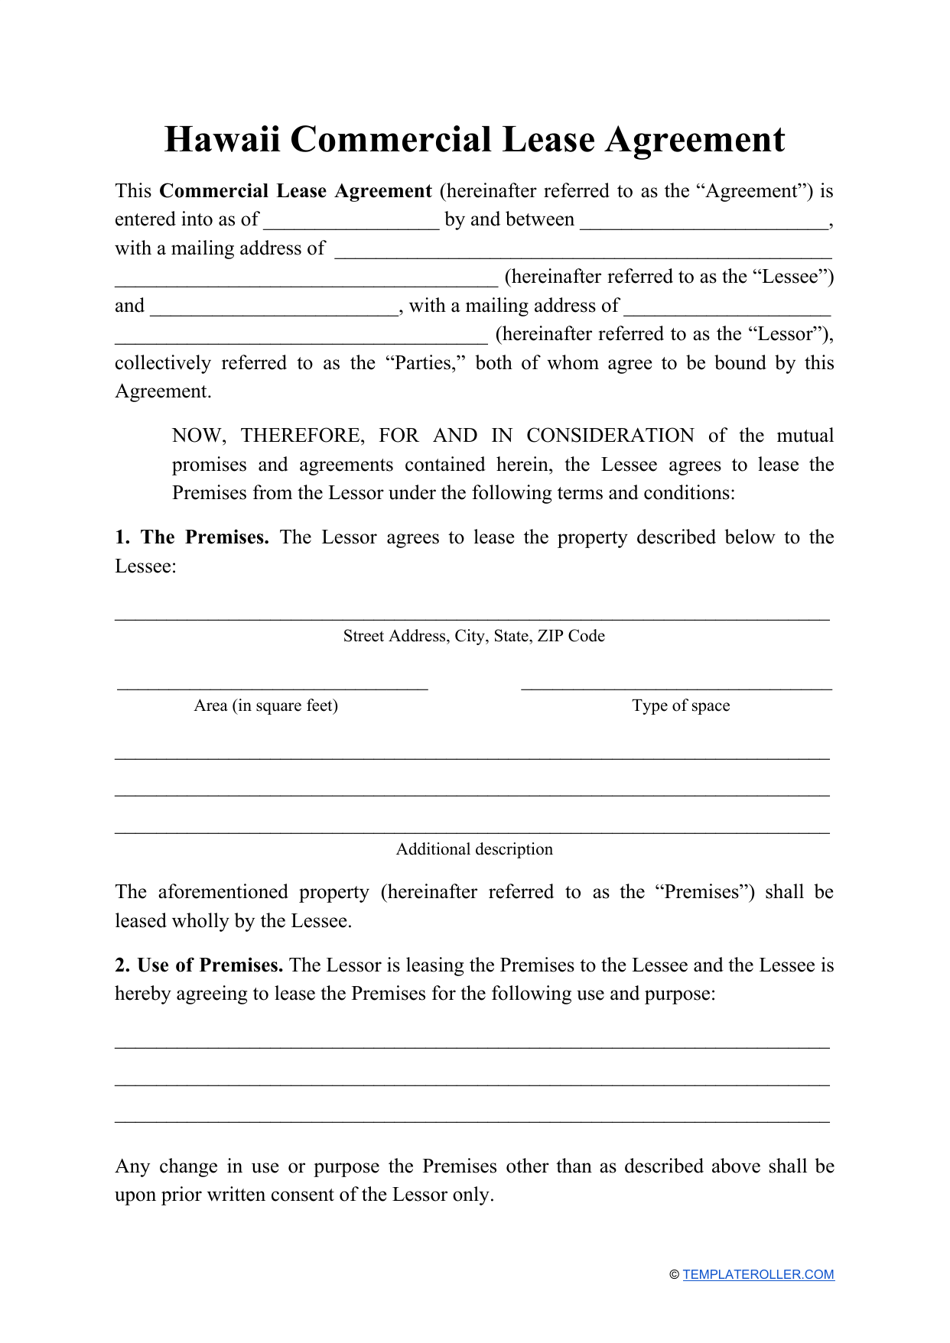 Commercial Lease Agreement Template - Hawaii, Page 1